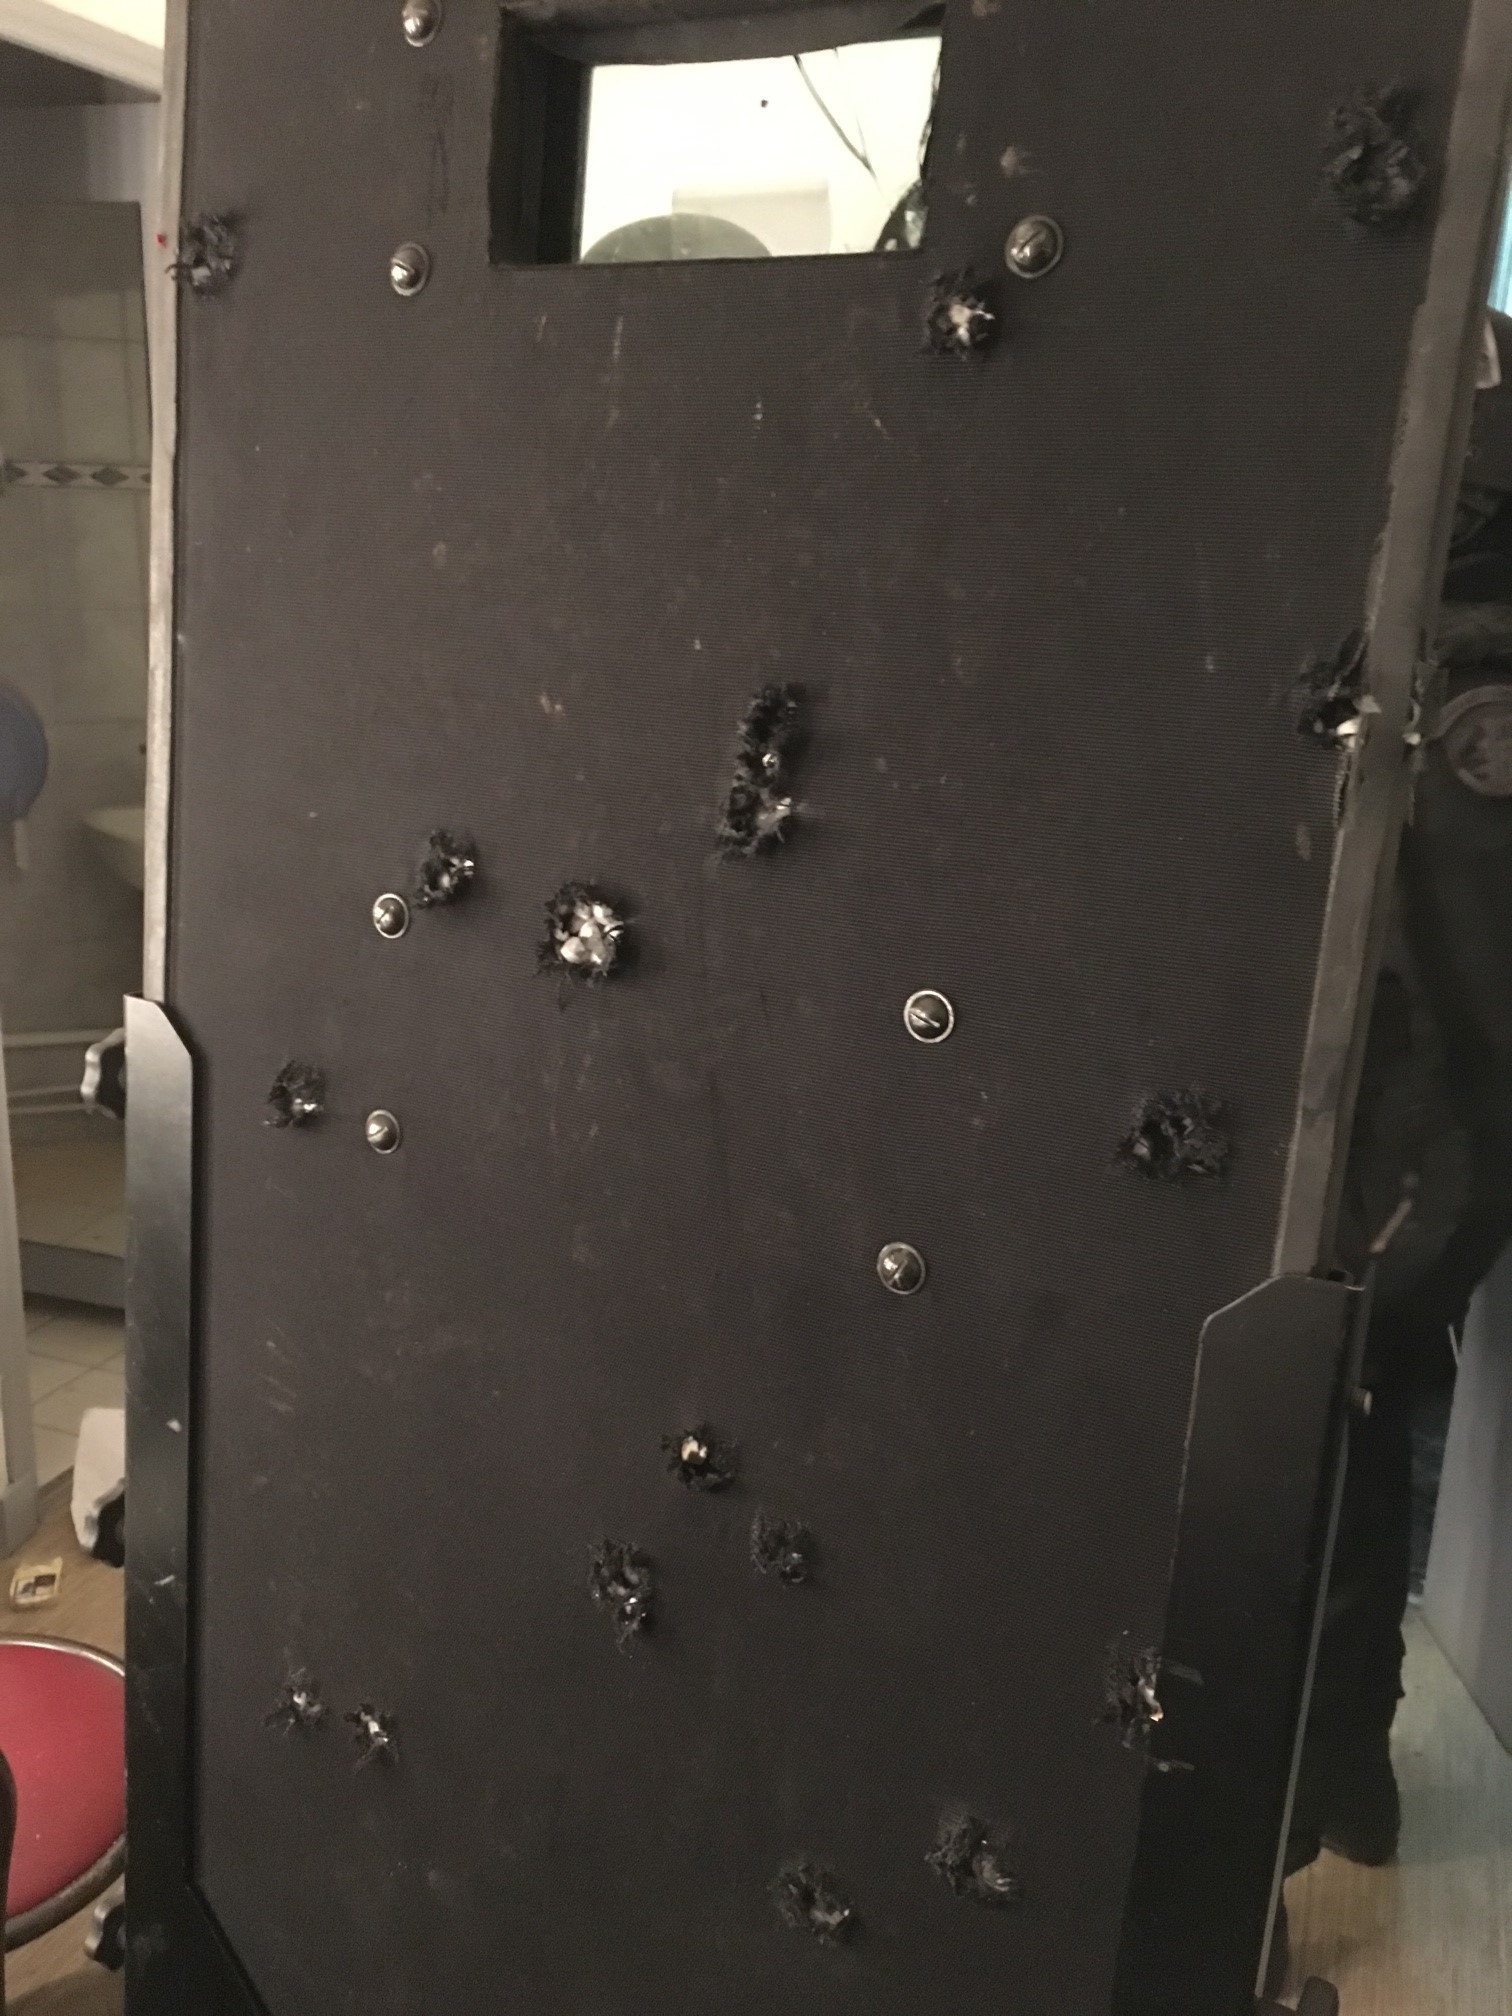 The Shield used by the French police to enter the Bataclan